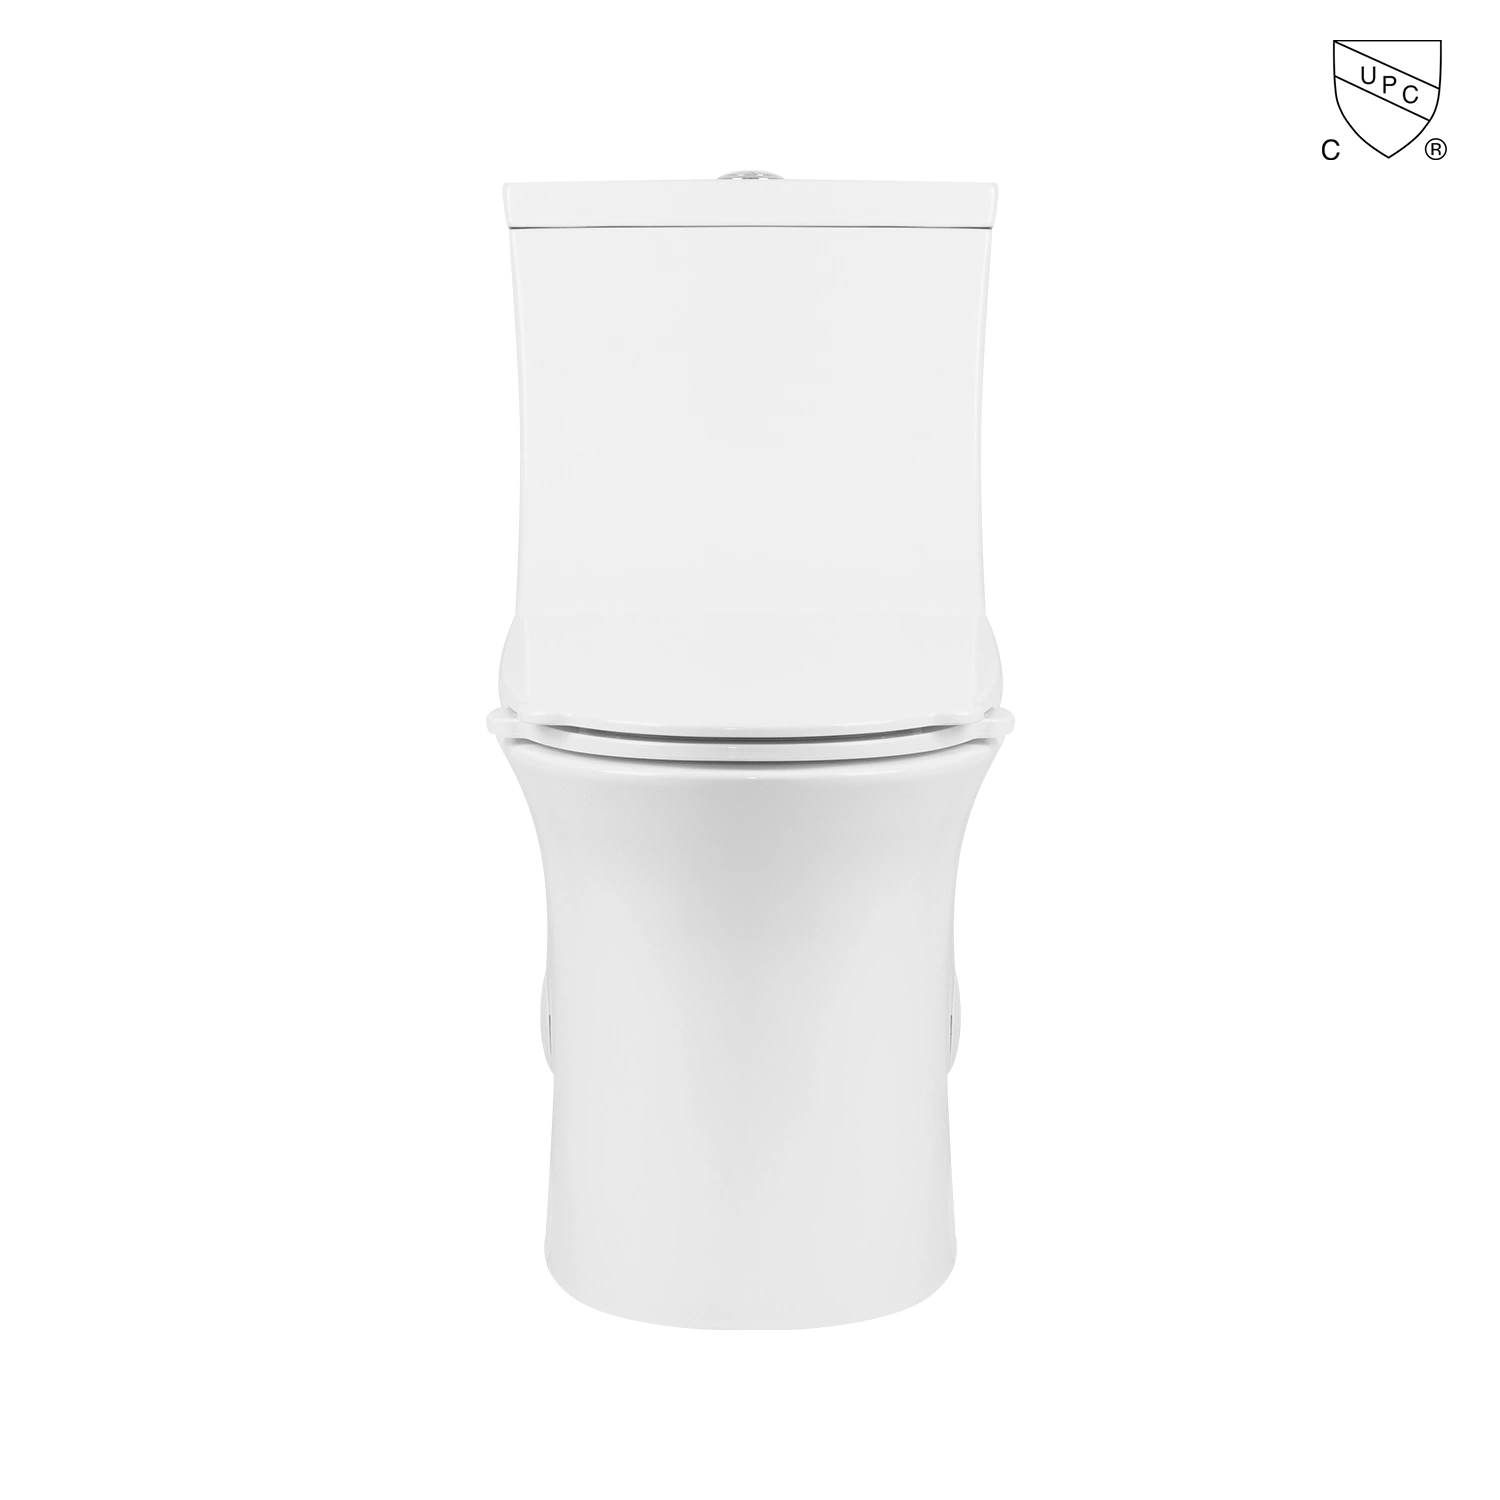 Bathroom Ceramic Sanitary Ware Cupc Certified Porcelain S-Trap Elongated White Skirted One-Piece Toilet Seat with Water Tank